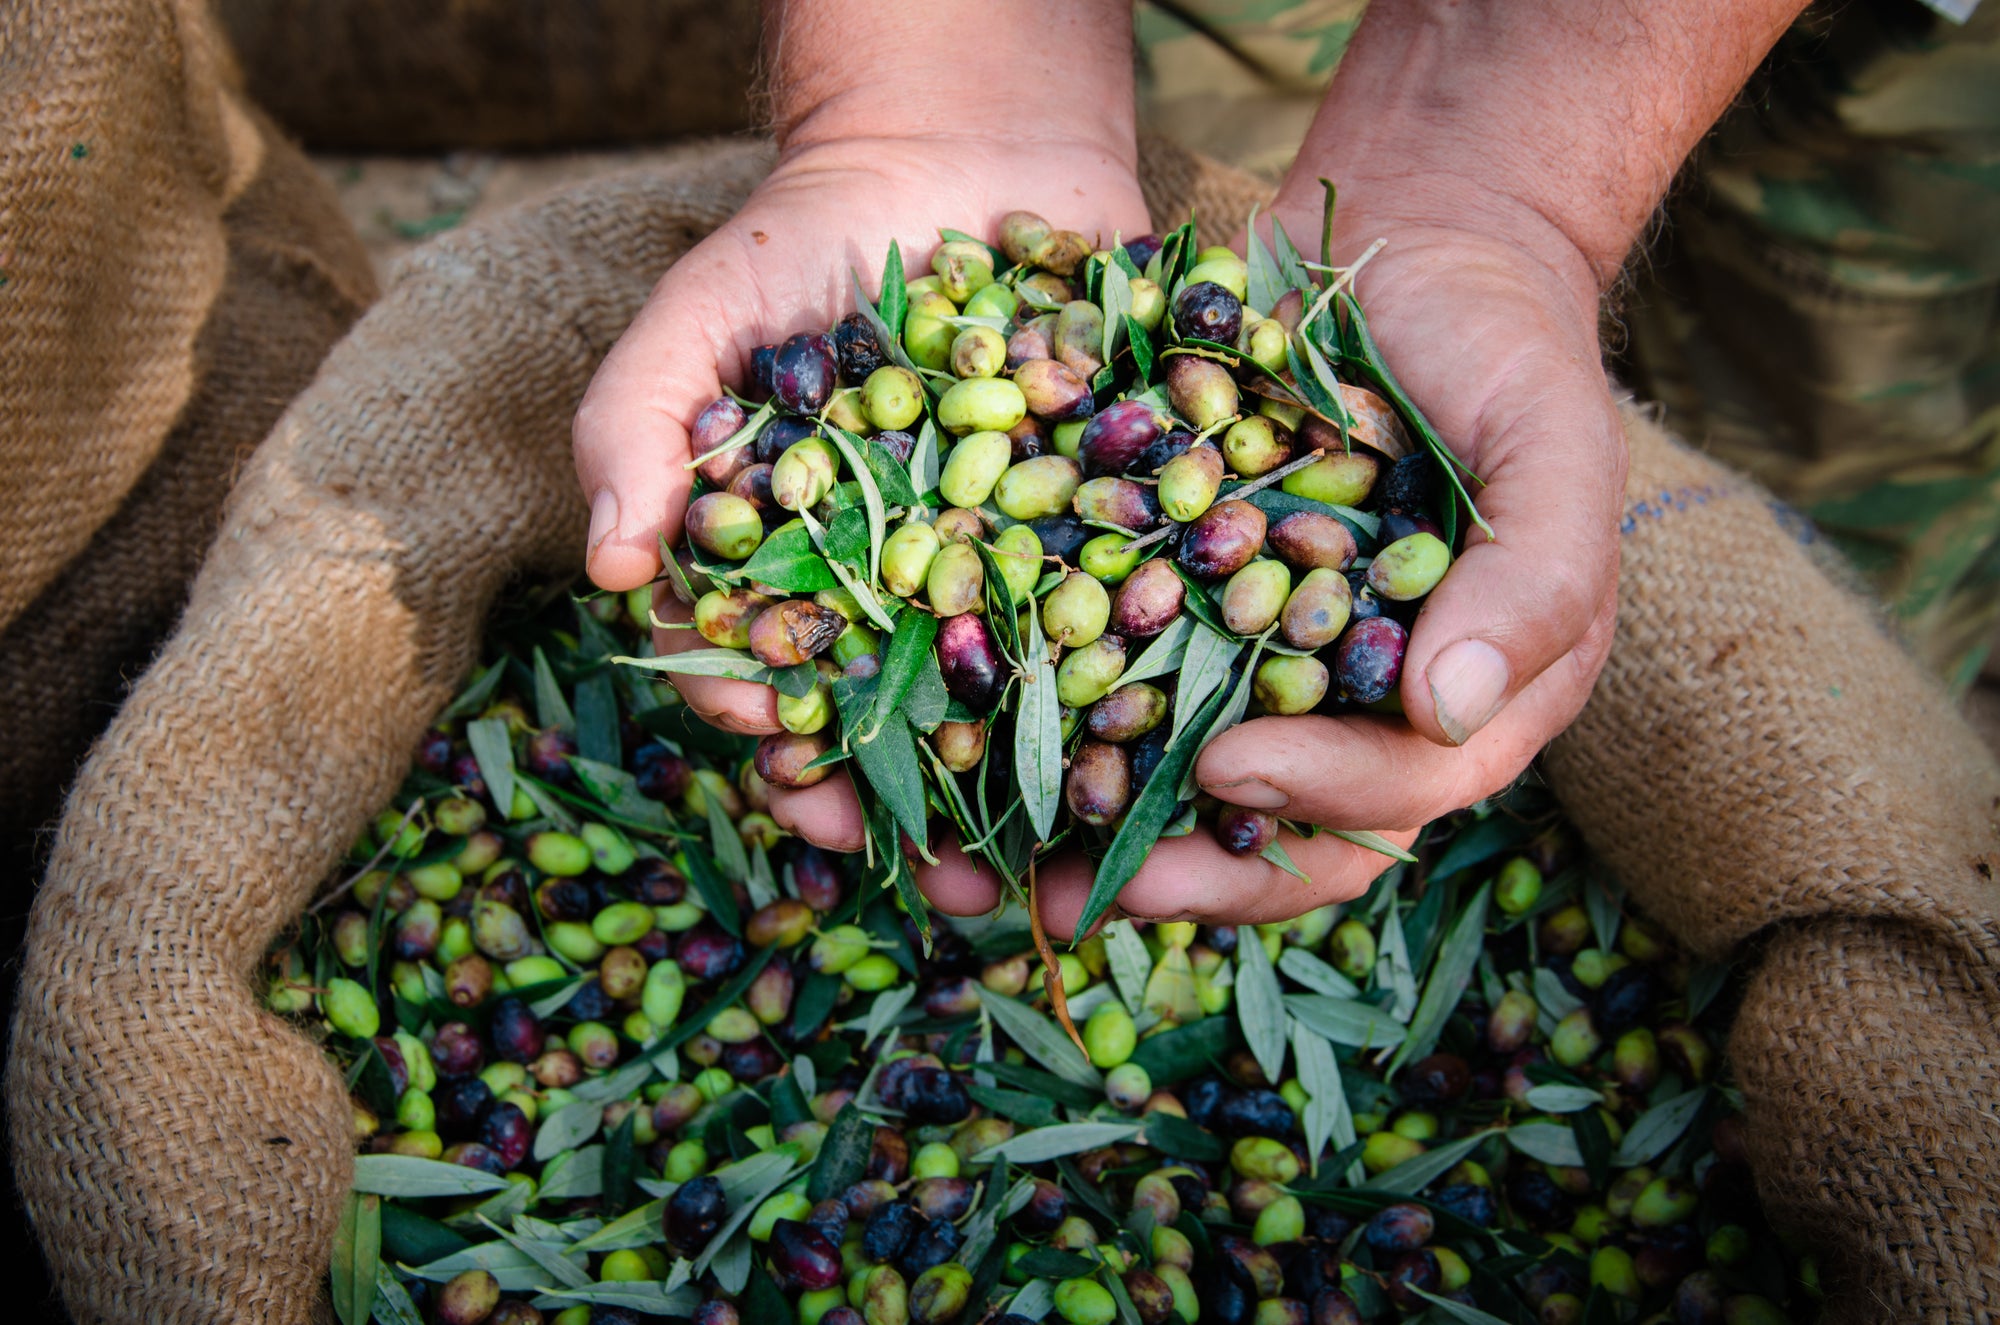 Gourmante all natural, hand-picked olives & olive leafs for your health.